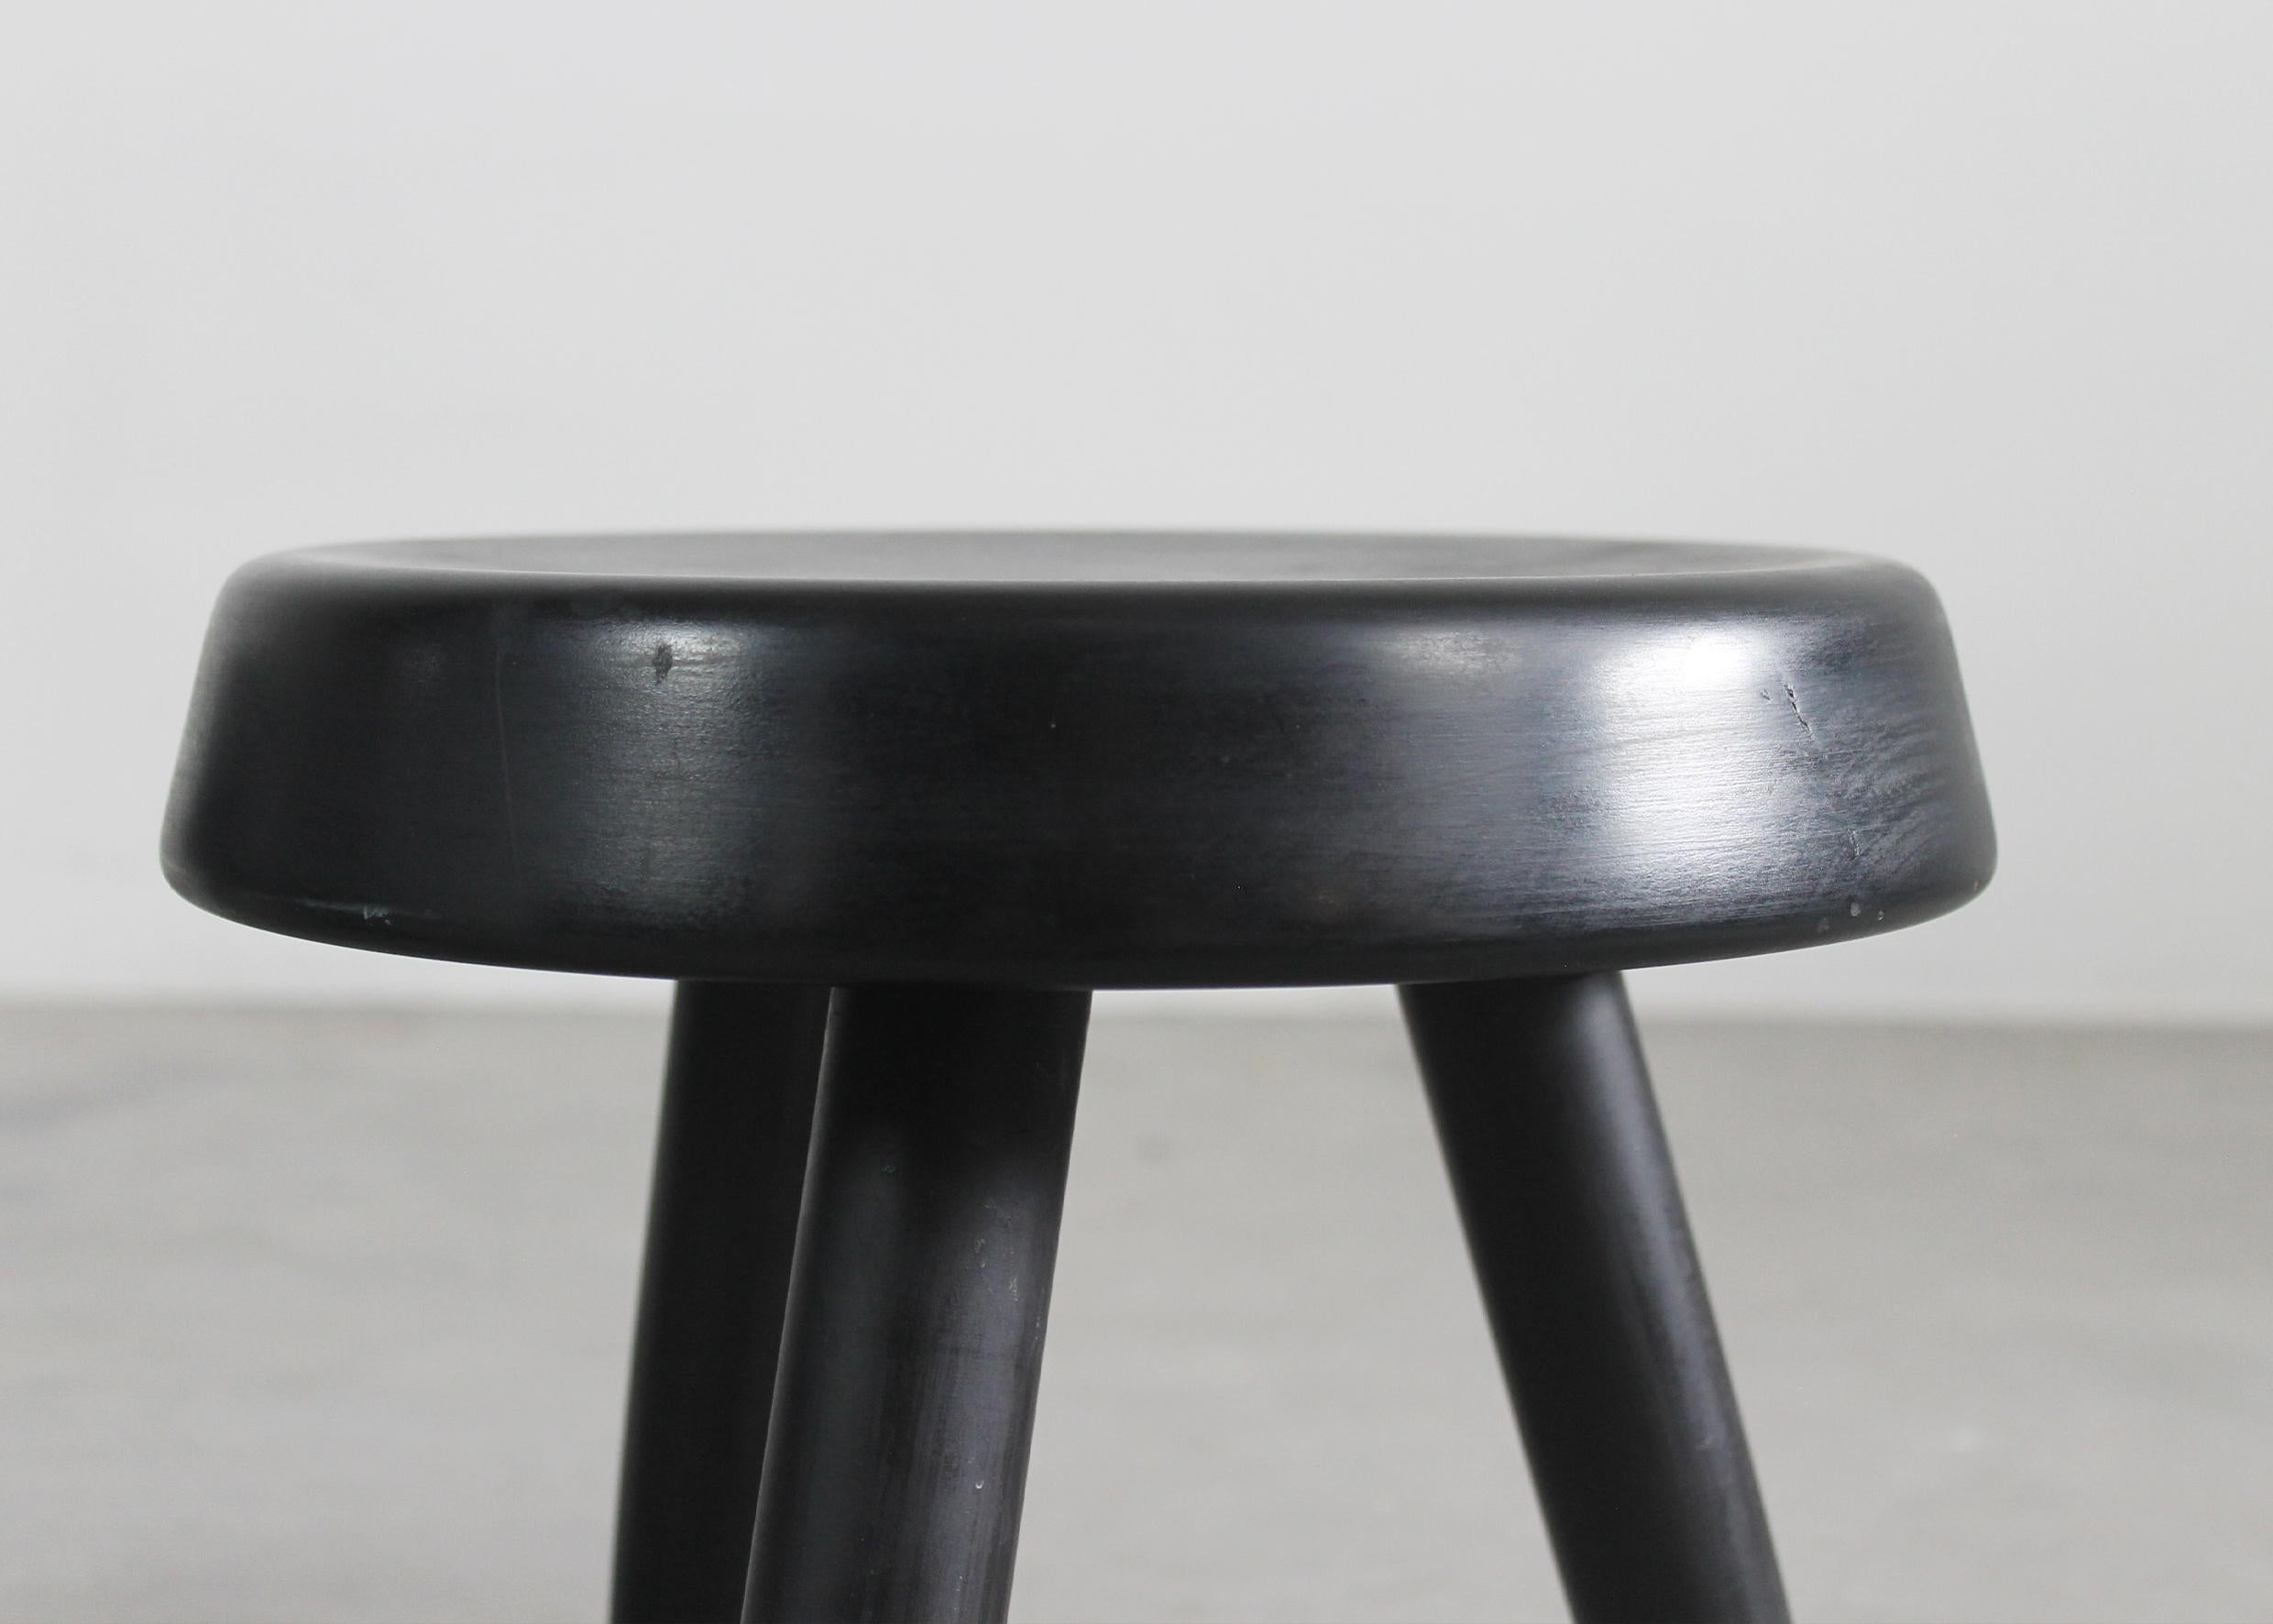 European Charlotte Perriand Set of Two Black Stools in Wood 1950s For Sale